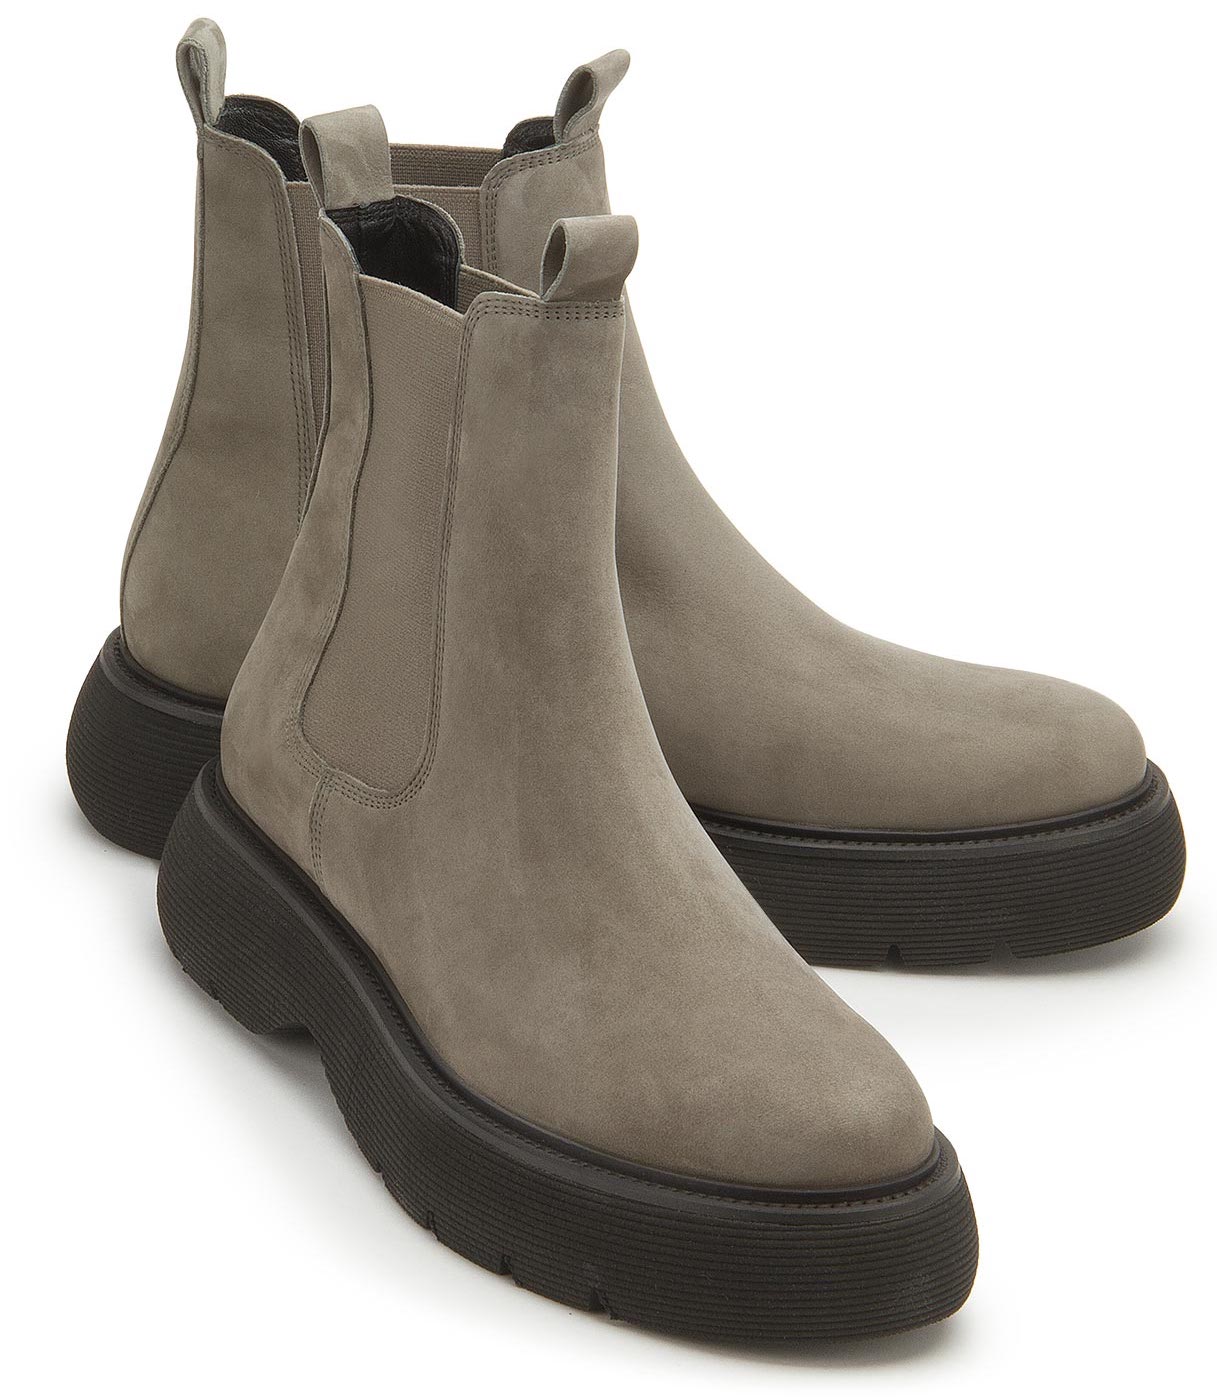 Preview: Kennel & Schmenger Chelsea Boot in oversizes: 5926-22